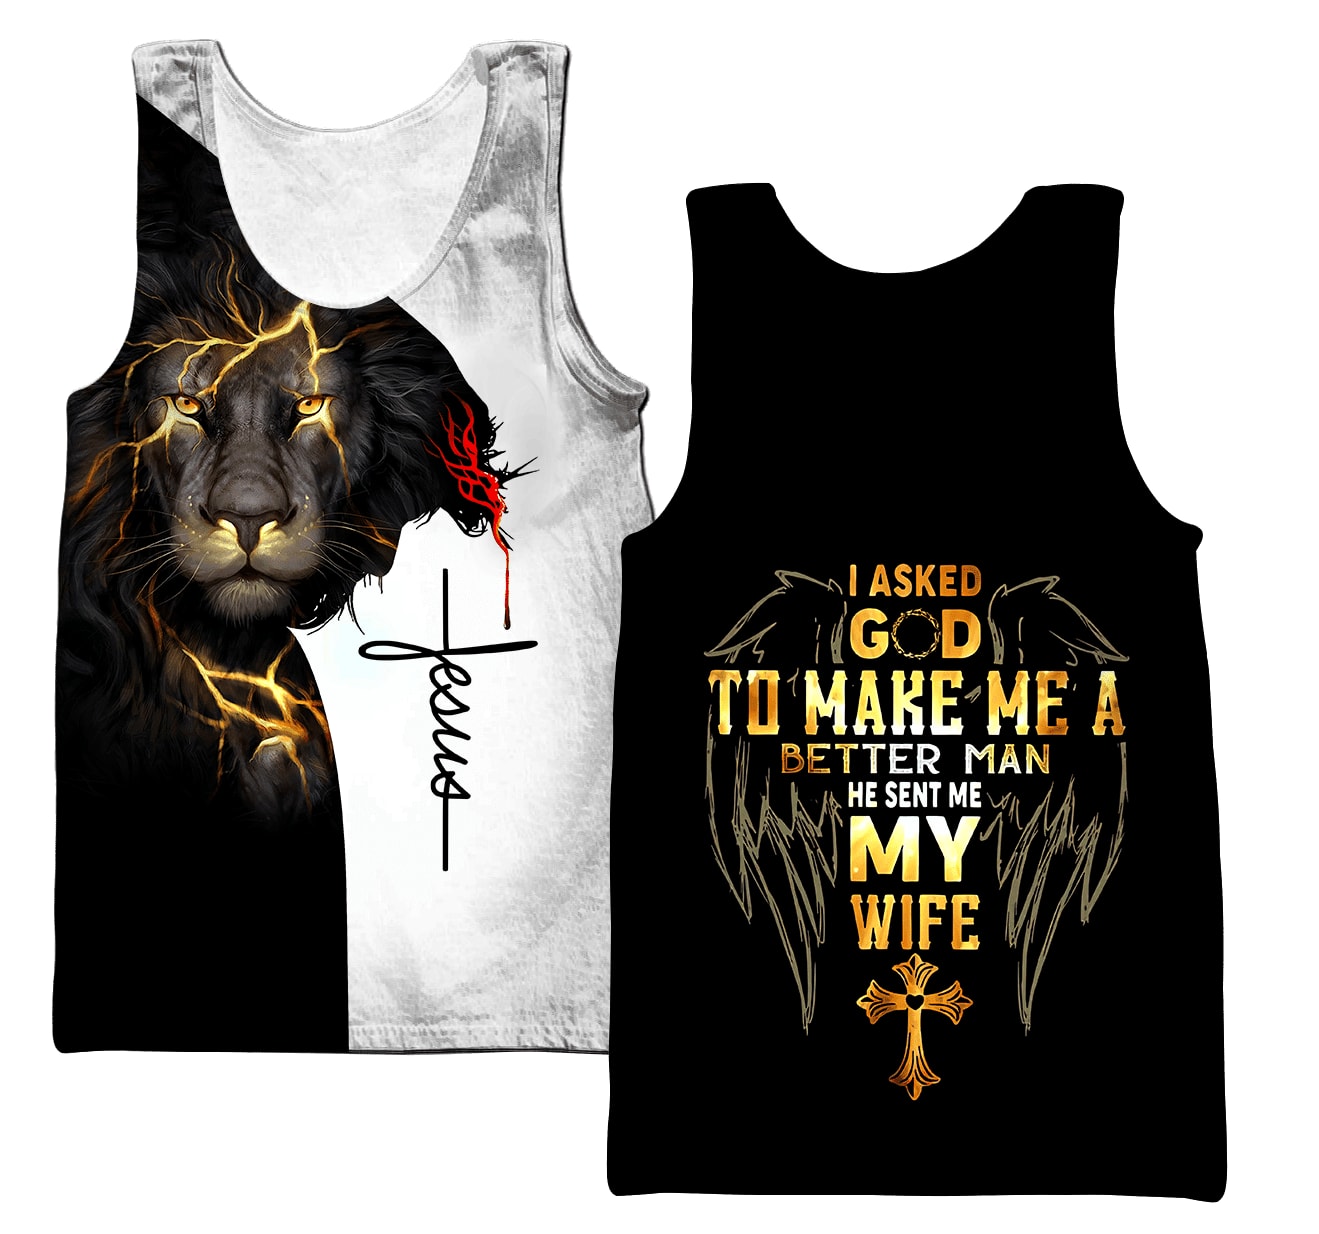 I Asked God To Make Me A Better Man He Sent Me My Wife Jesus  Tank Top - Christian Tank Top For Men